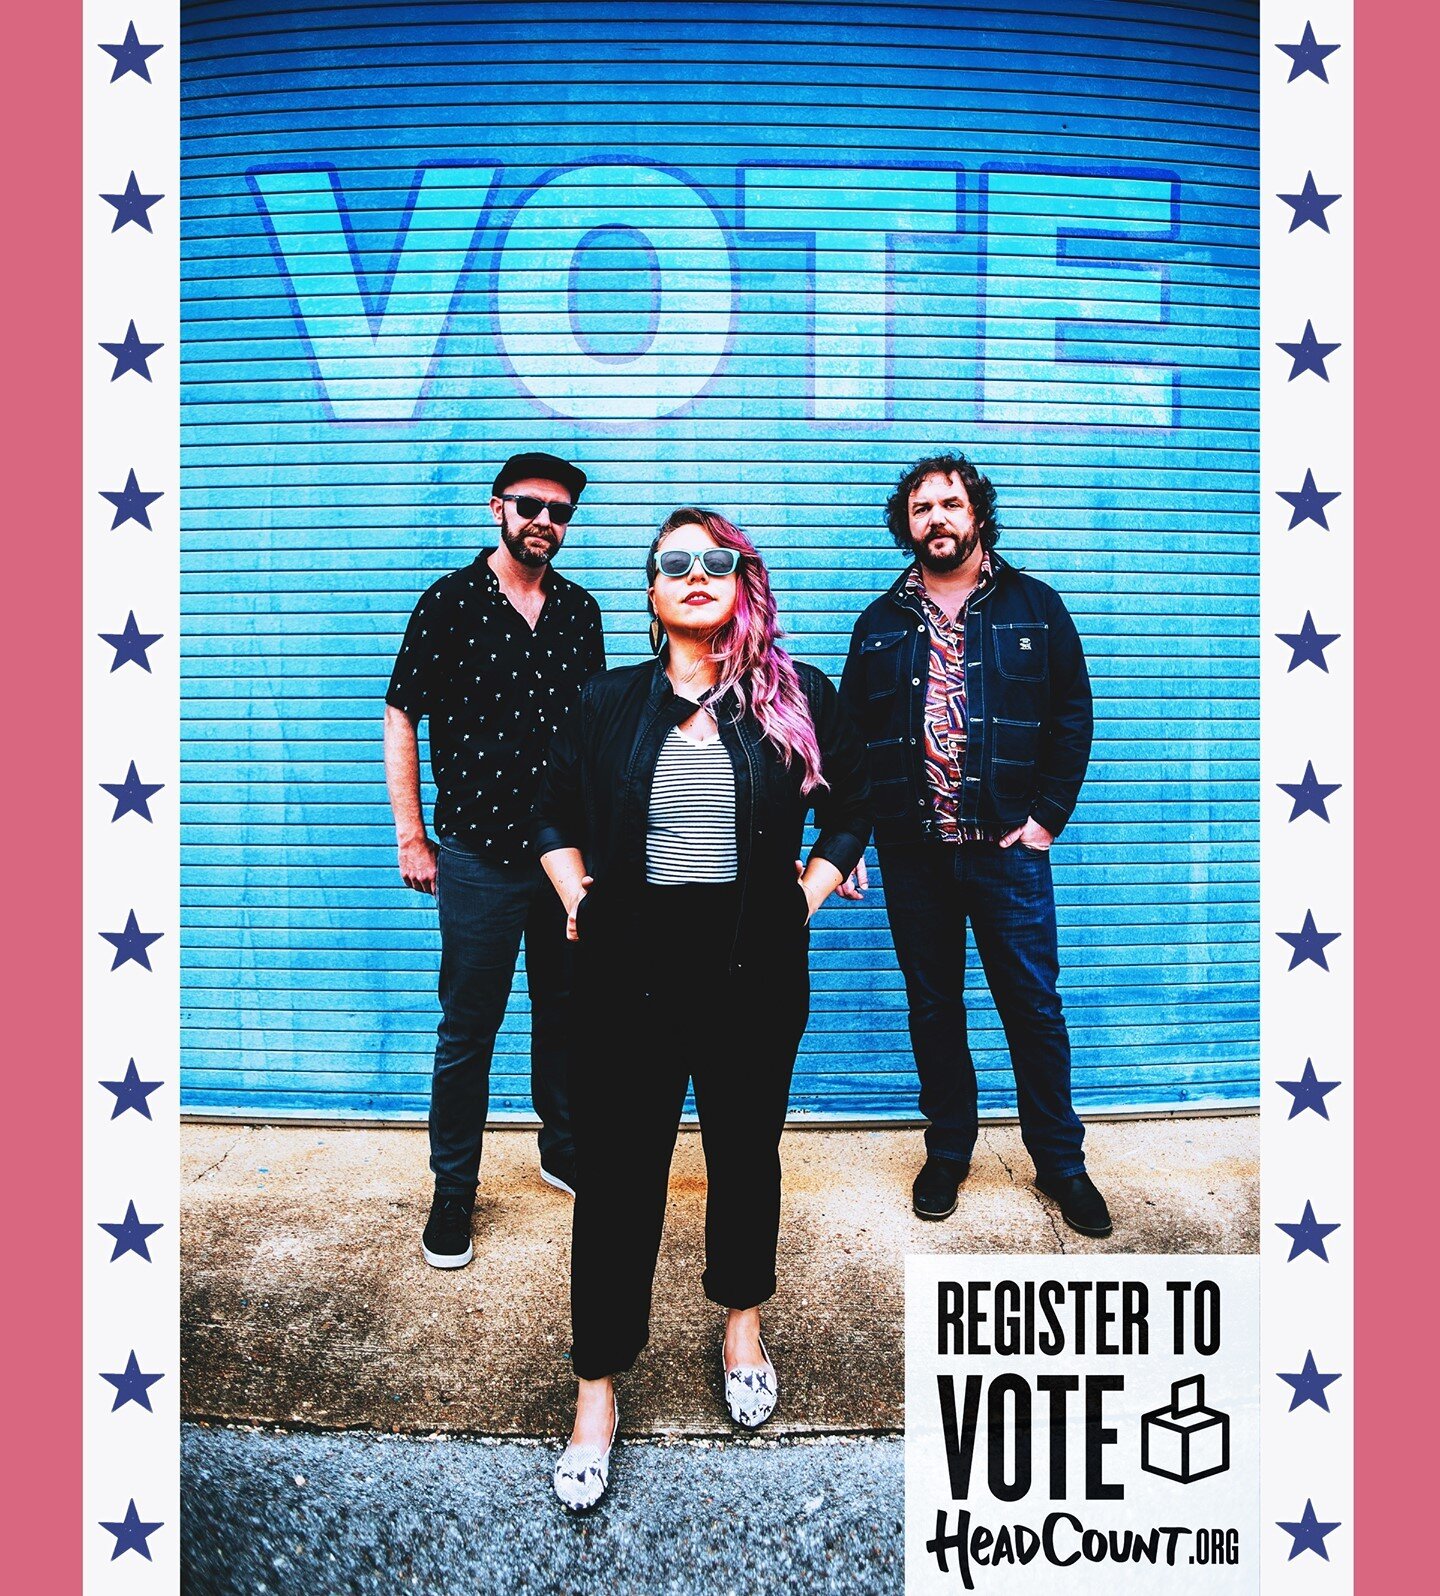 Hey hey it's #NationalVoterRegistrationDay and we want YOU to check that voter registration status and make a plan TODAY to be #VoteReady 🗳️ If your state has #EarlyVoting think about going early to beat the crowds. (Here in TN early voting starts O